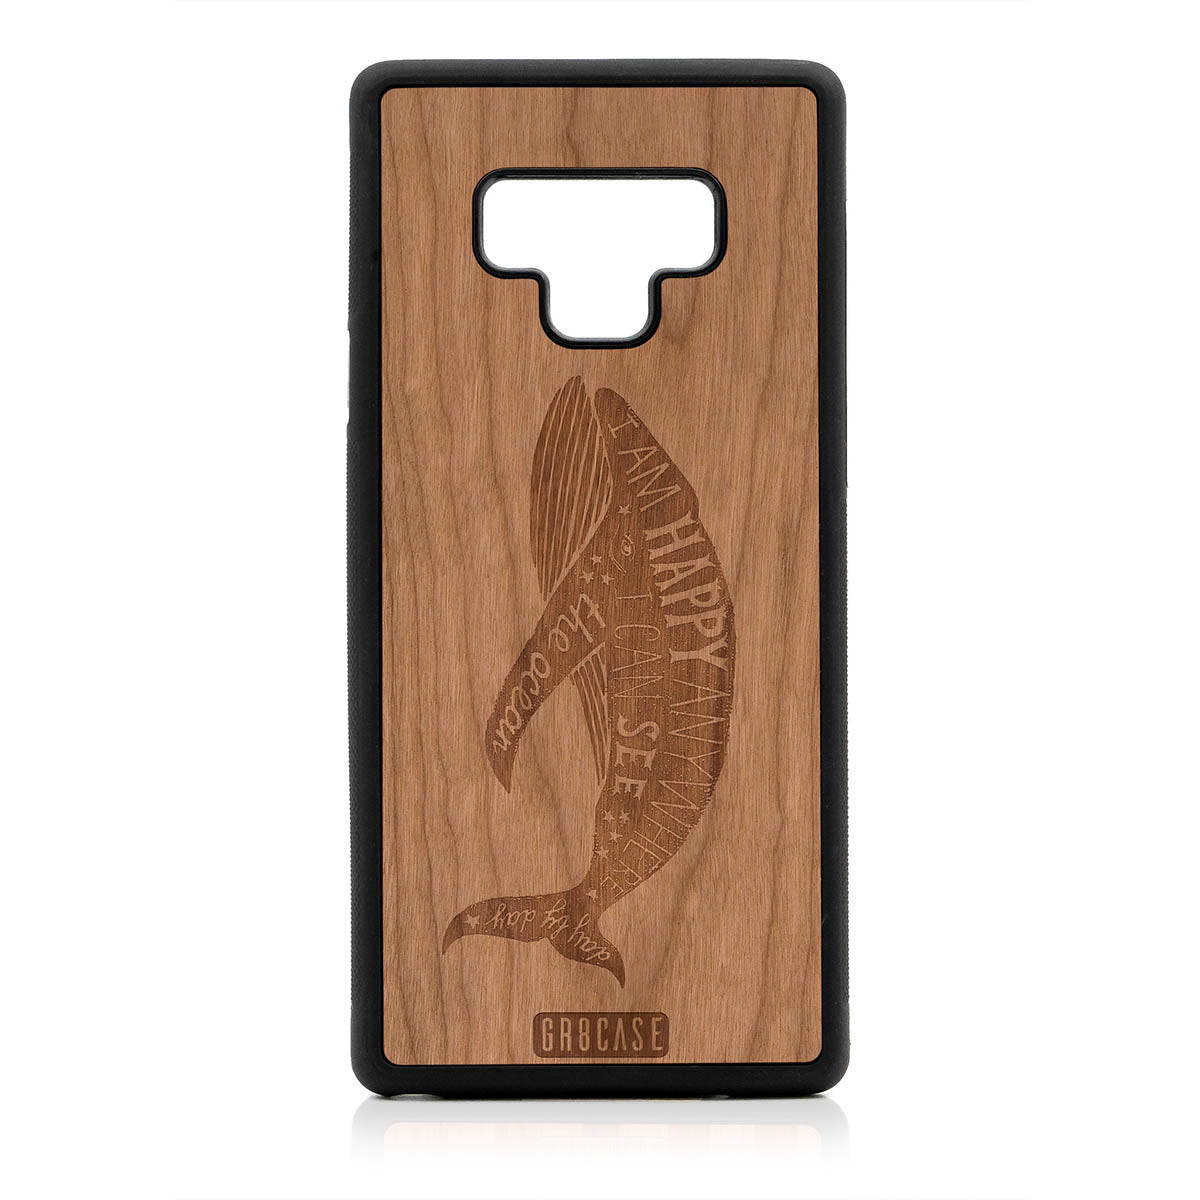 I'm Happy Anywhere I Can See The Ocean (Whale) Design Wood Case For Samsung Galaxy Note 9